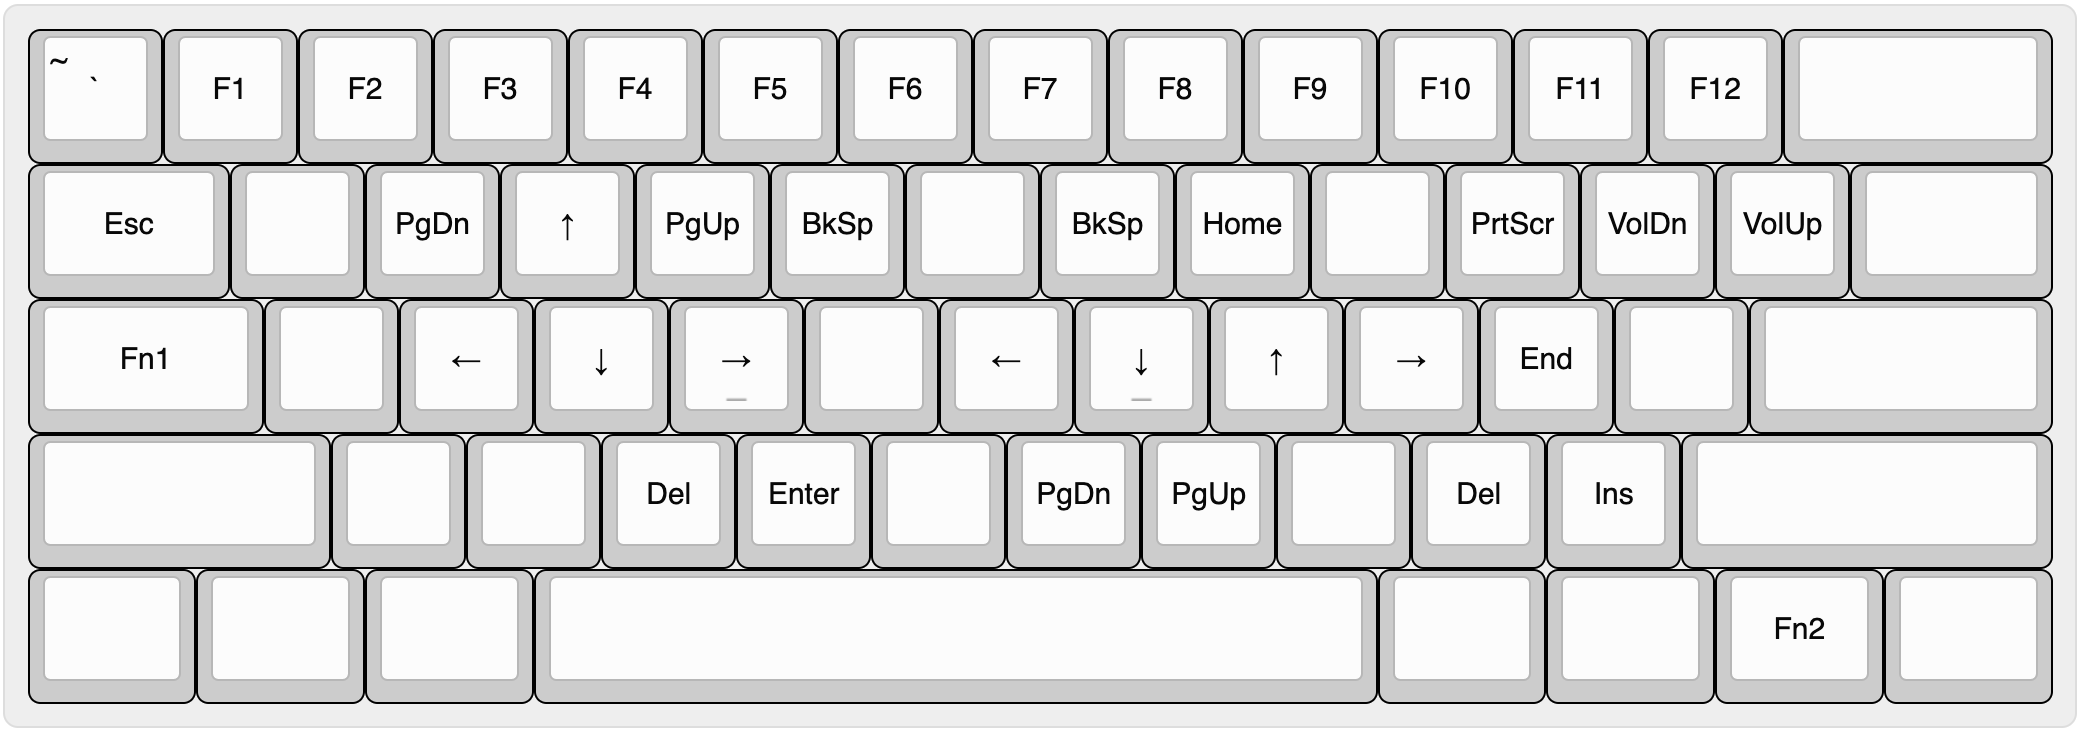 attachment:keyboard-layout-anne-pro-2-mac-fn1.png